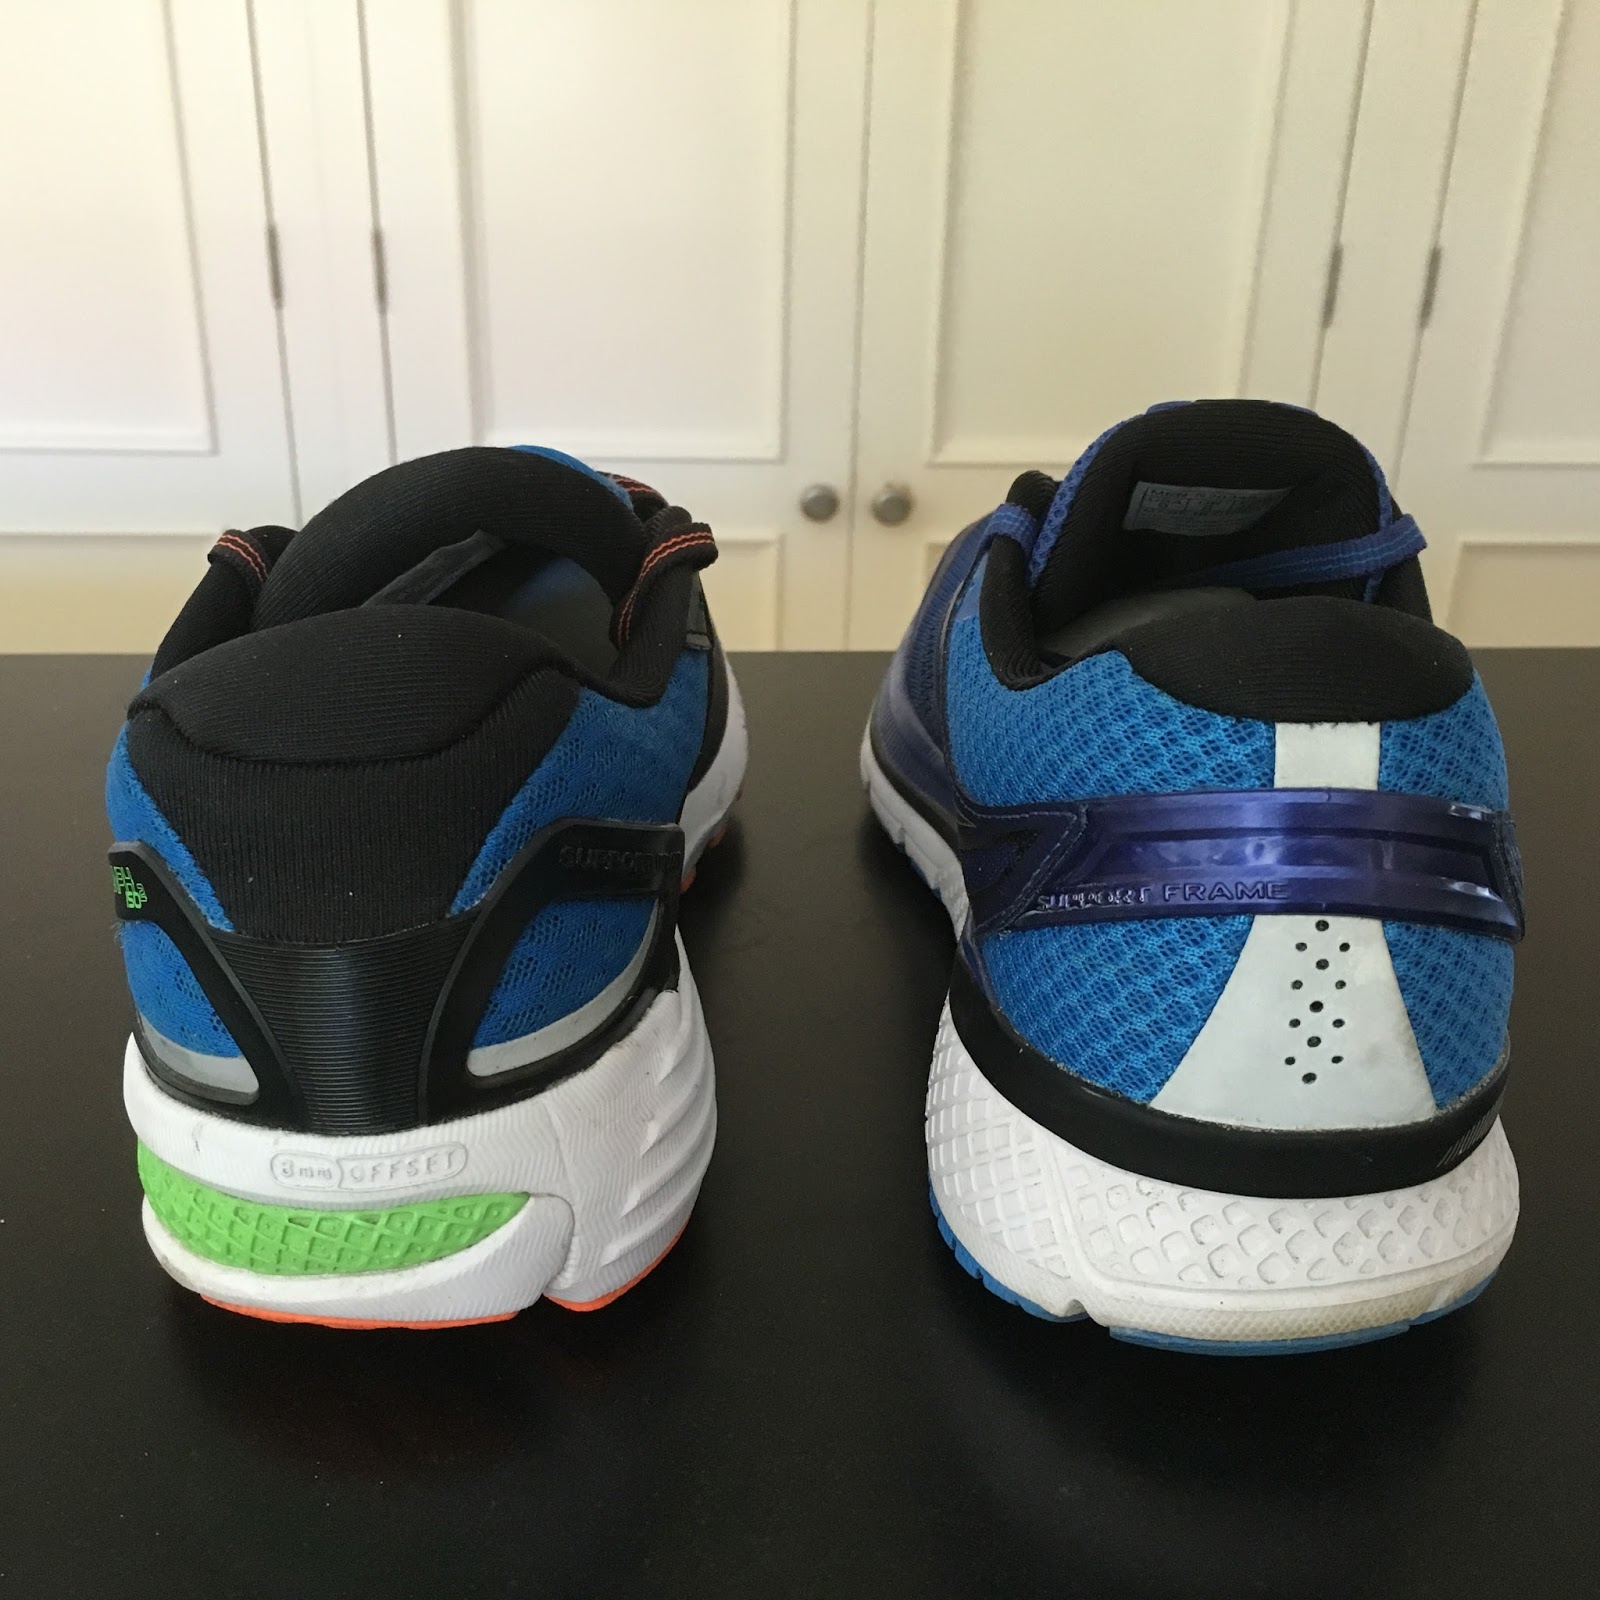 difference between saucony triumph iso 2 and iso 3